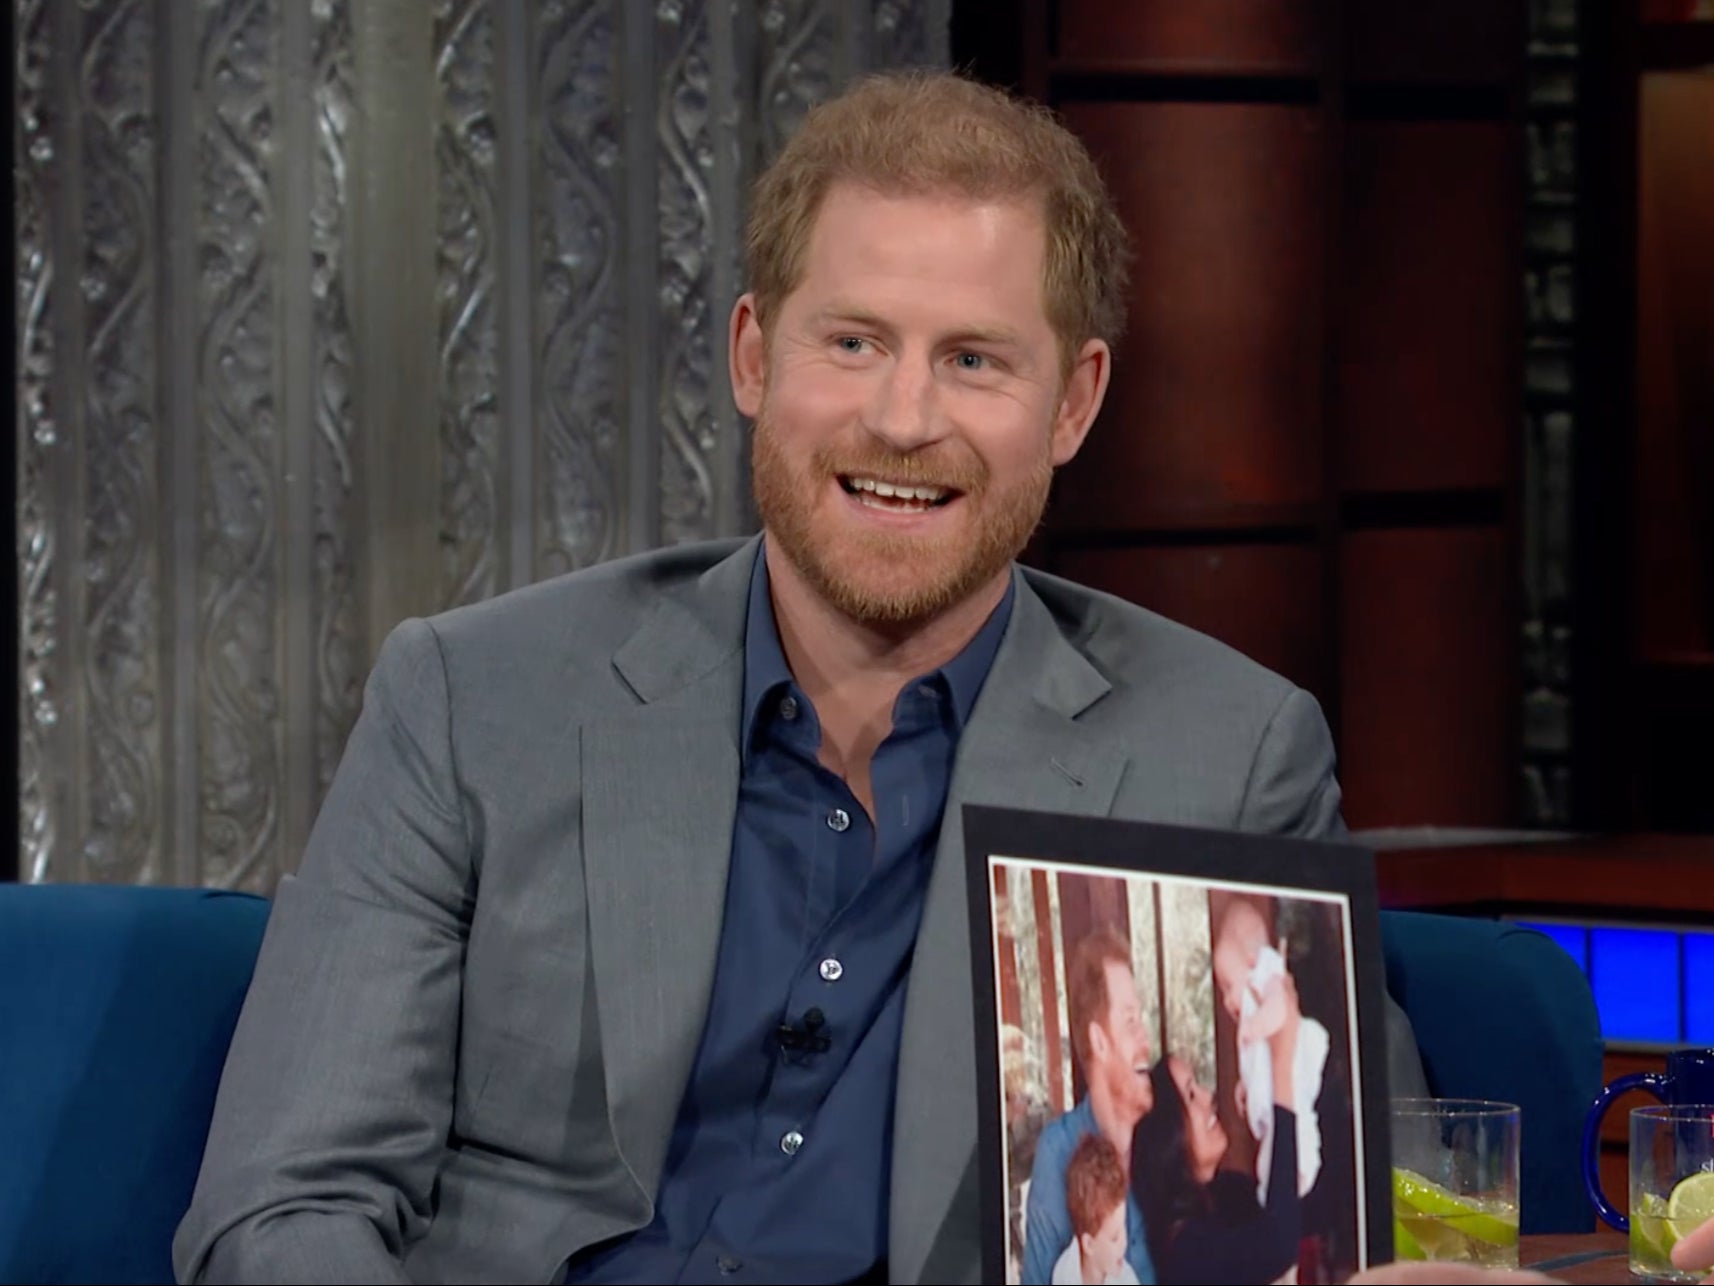 Prince Harry during an appearance on ‘The Late Show with Stephen Colbert’